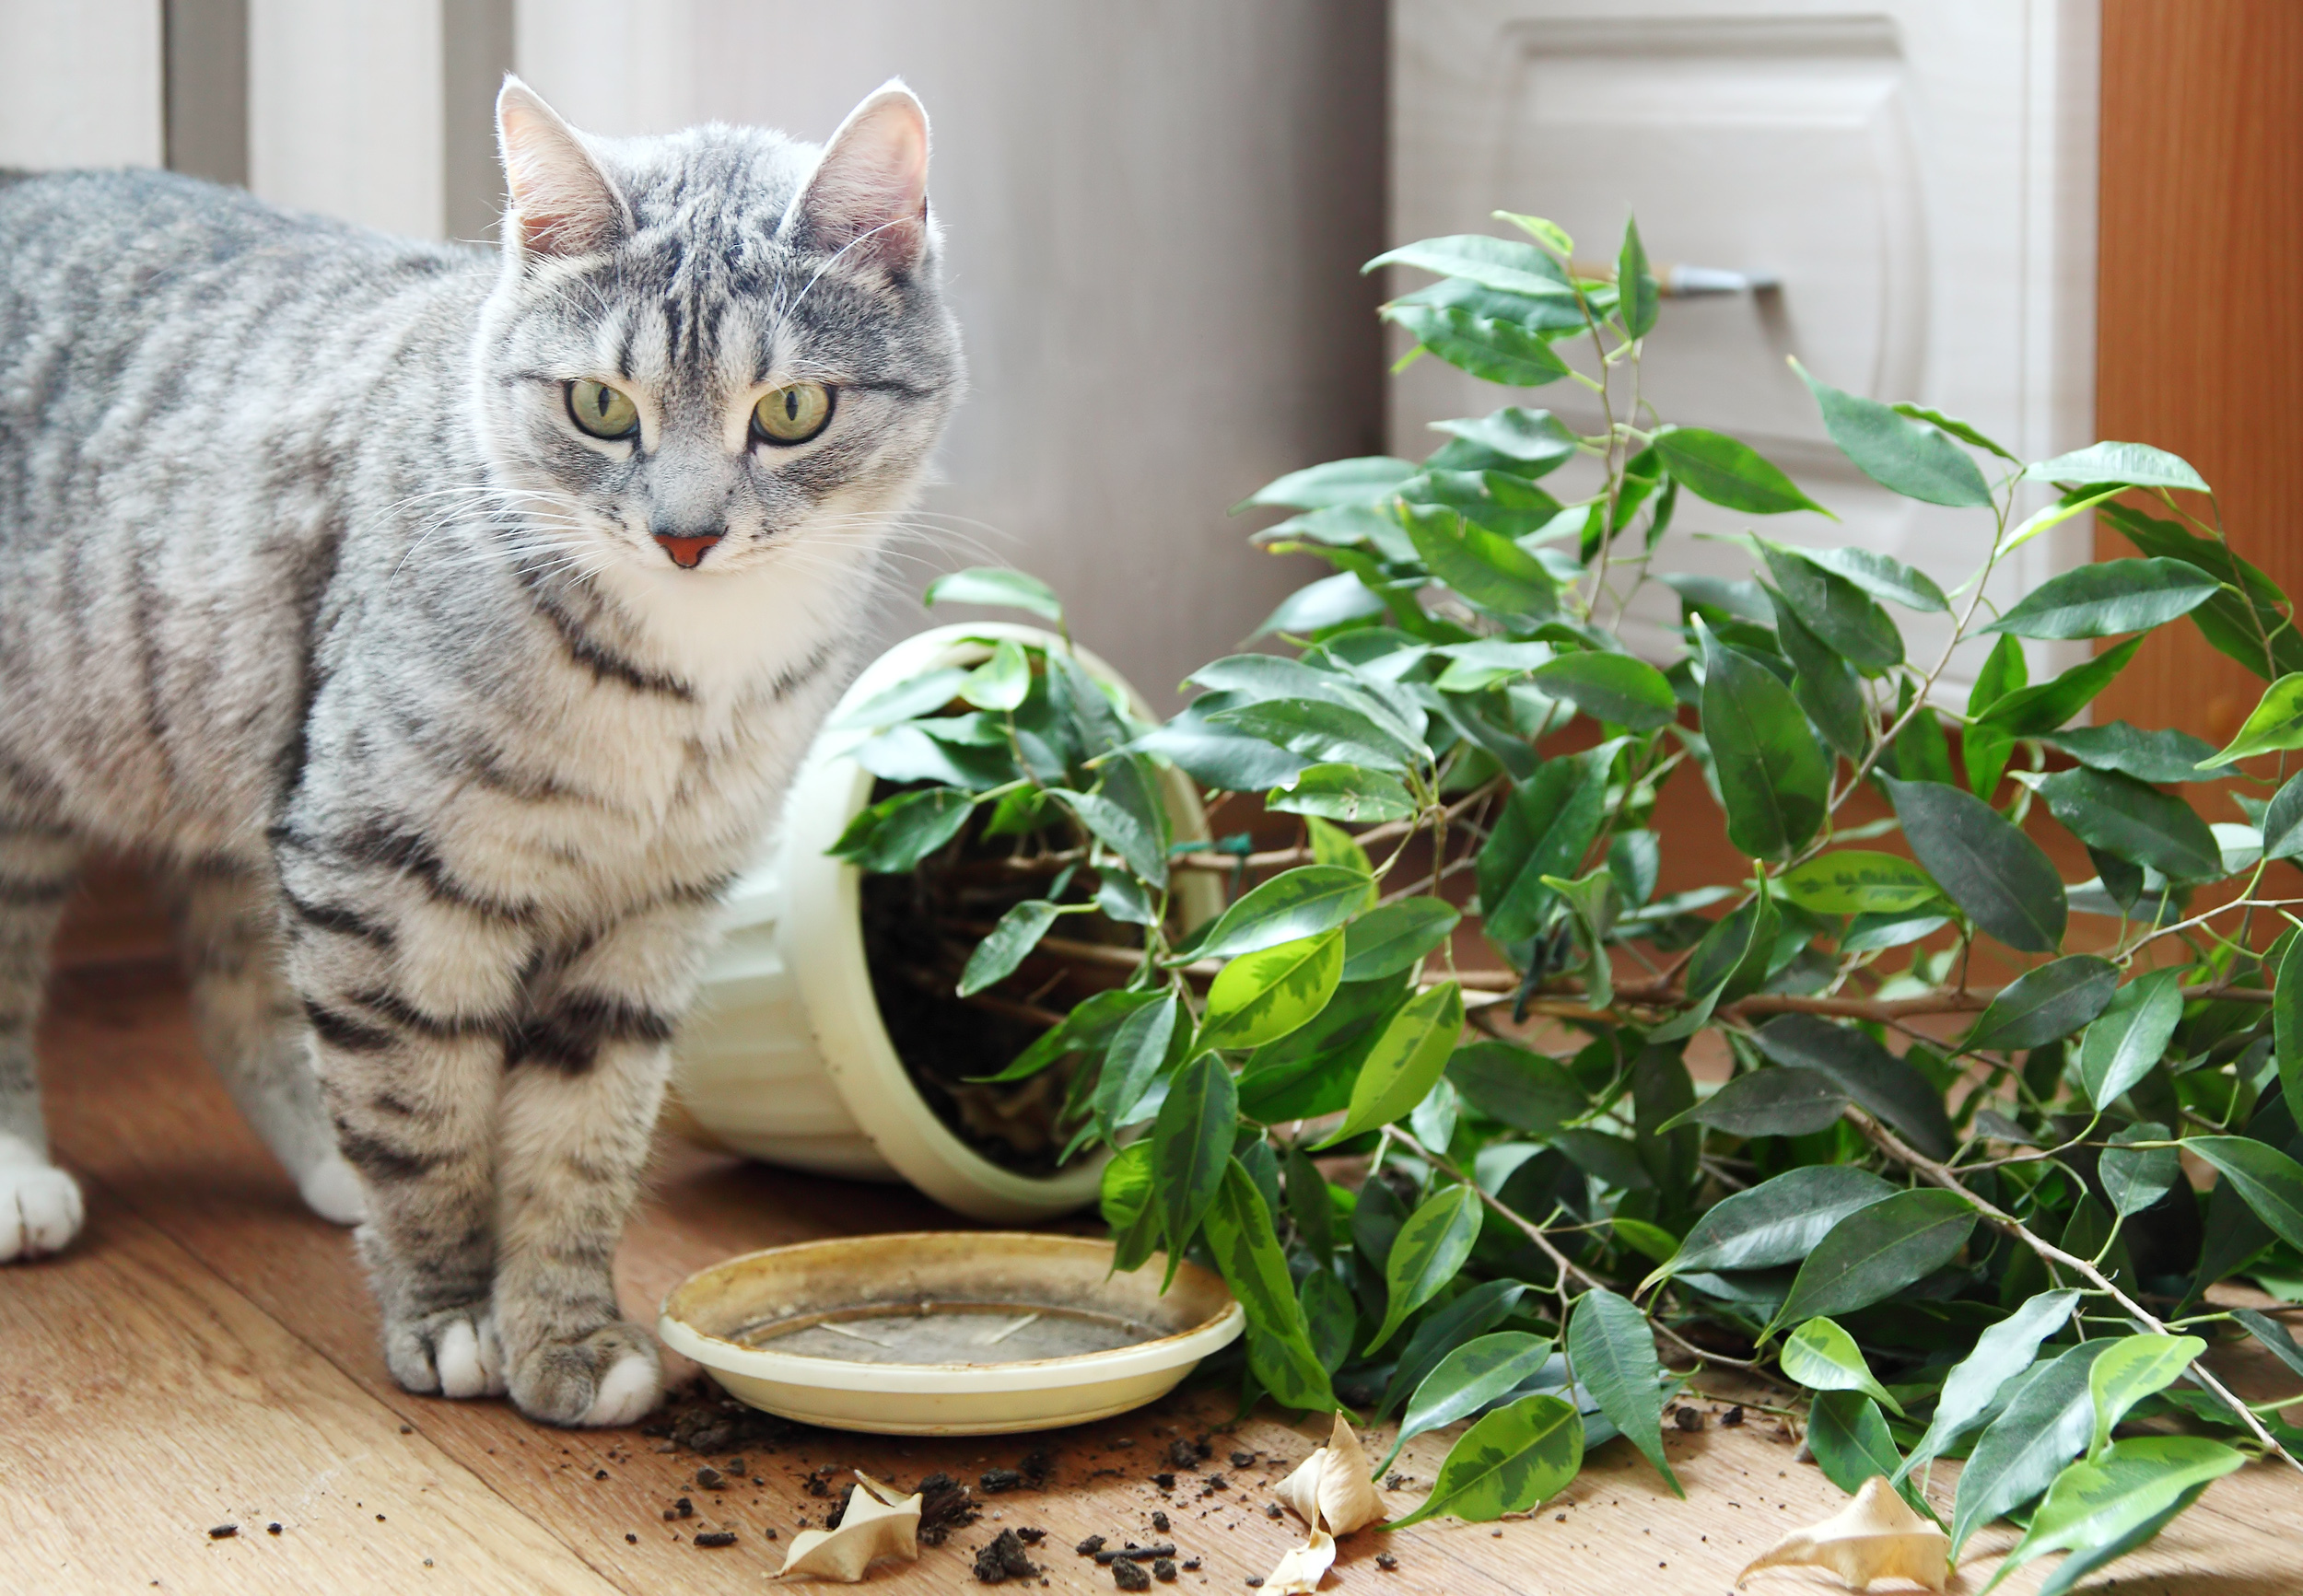 cat safety tips keeping kittens safe from toxic plants and broken pots